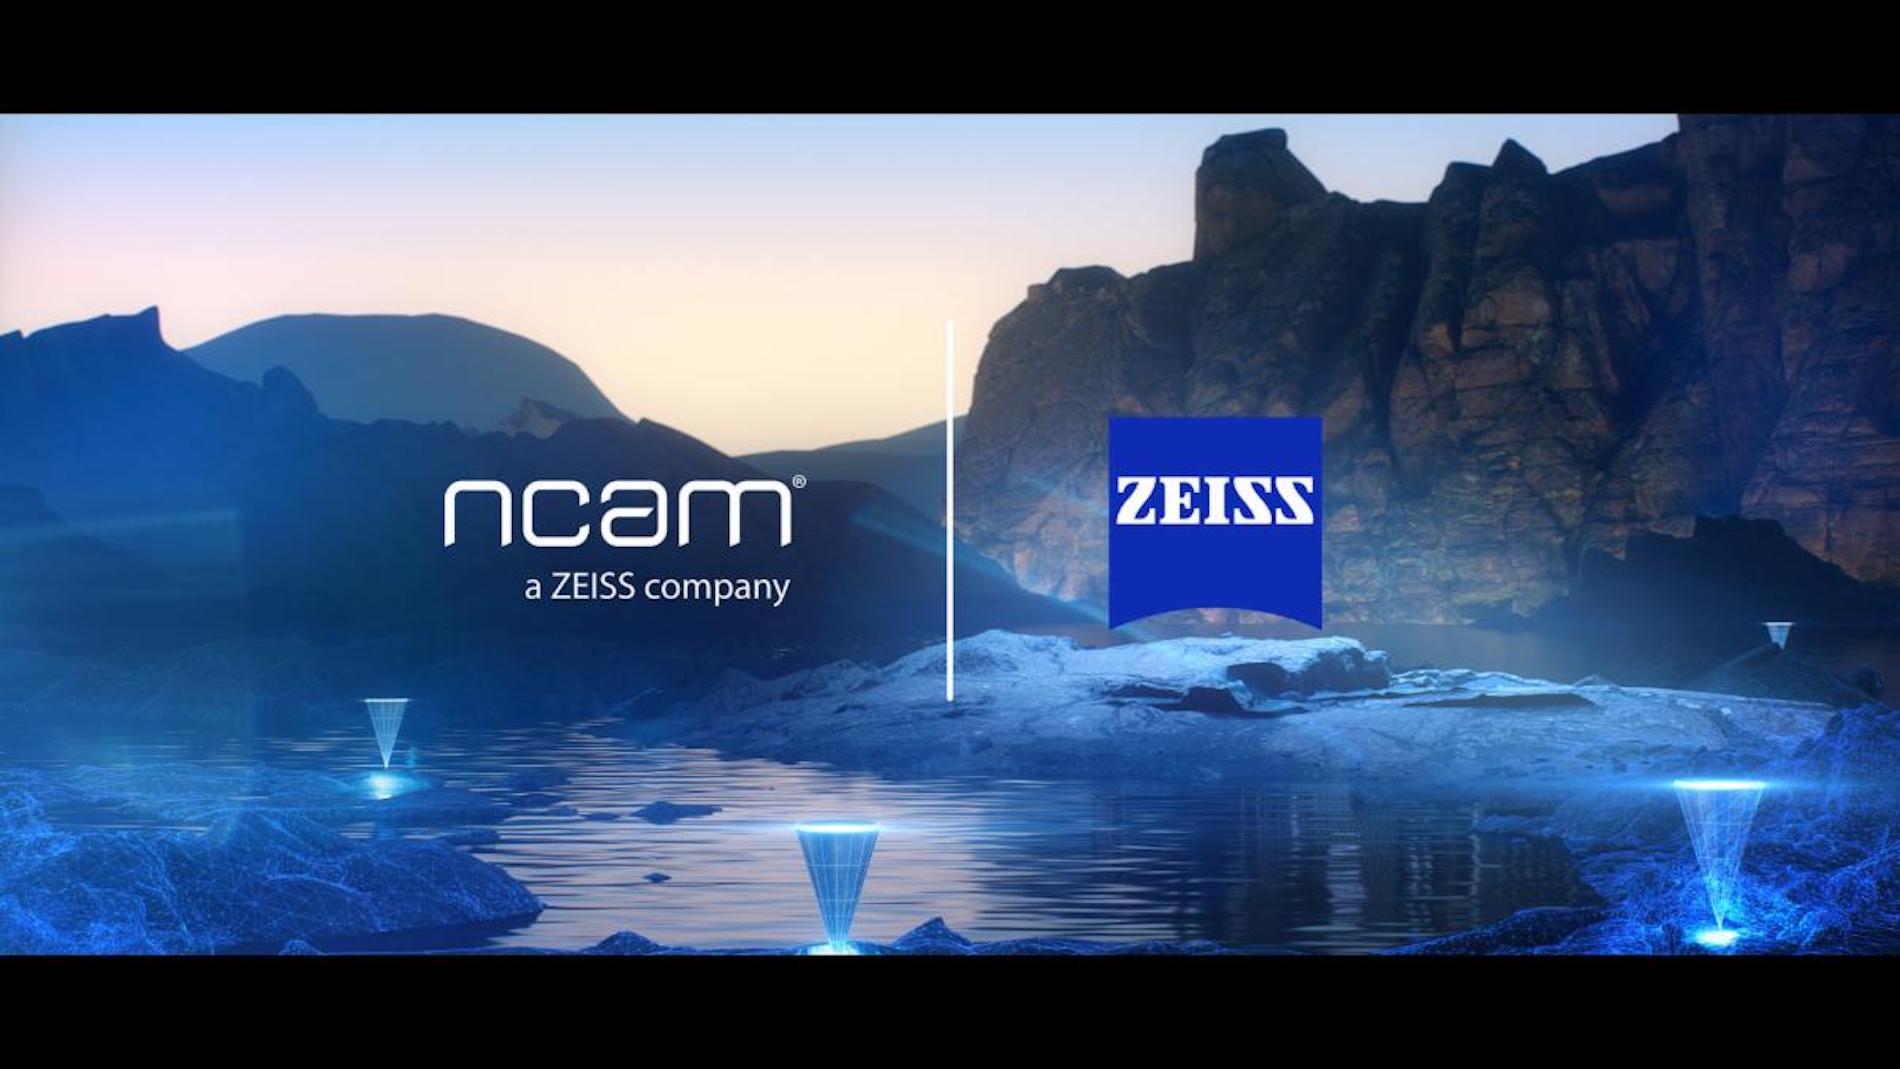 NP ZEISS acquires Ncam Technologies